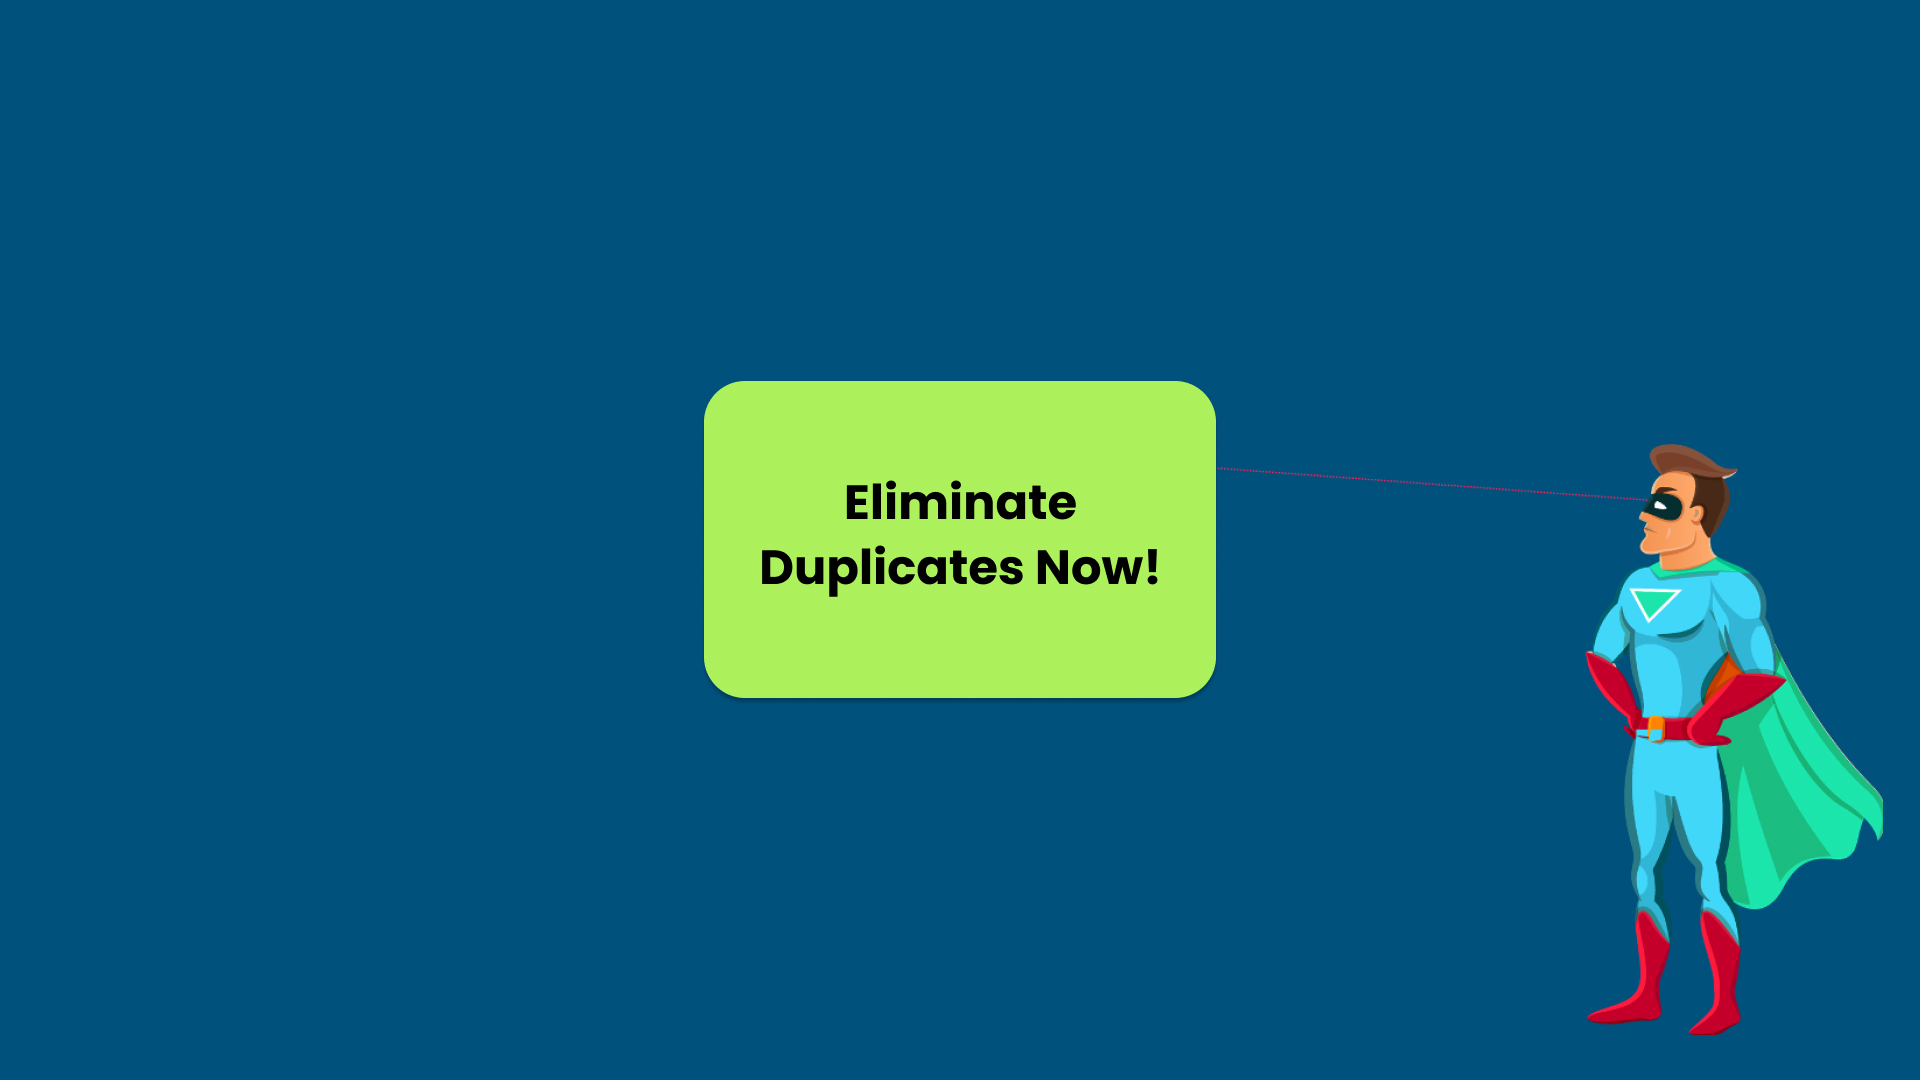 End users can download this Delpha conversation to get superpowers to eliminate duplicate contacts inside Salesforce.